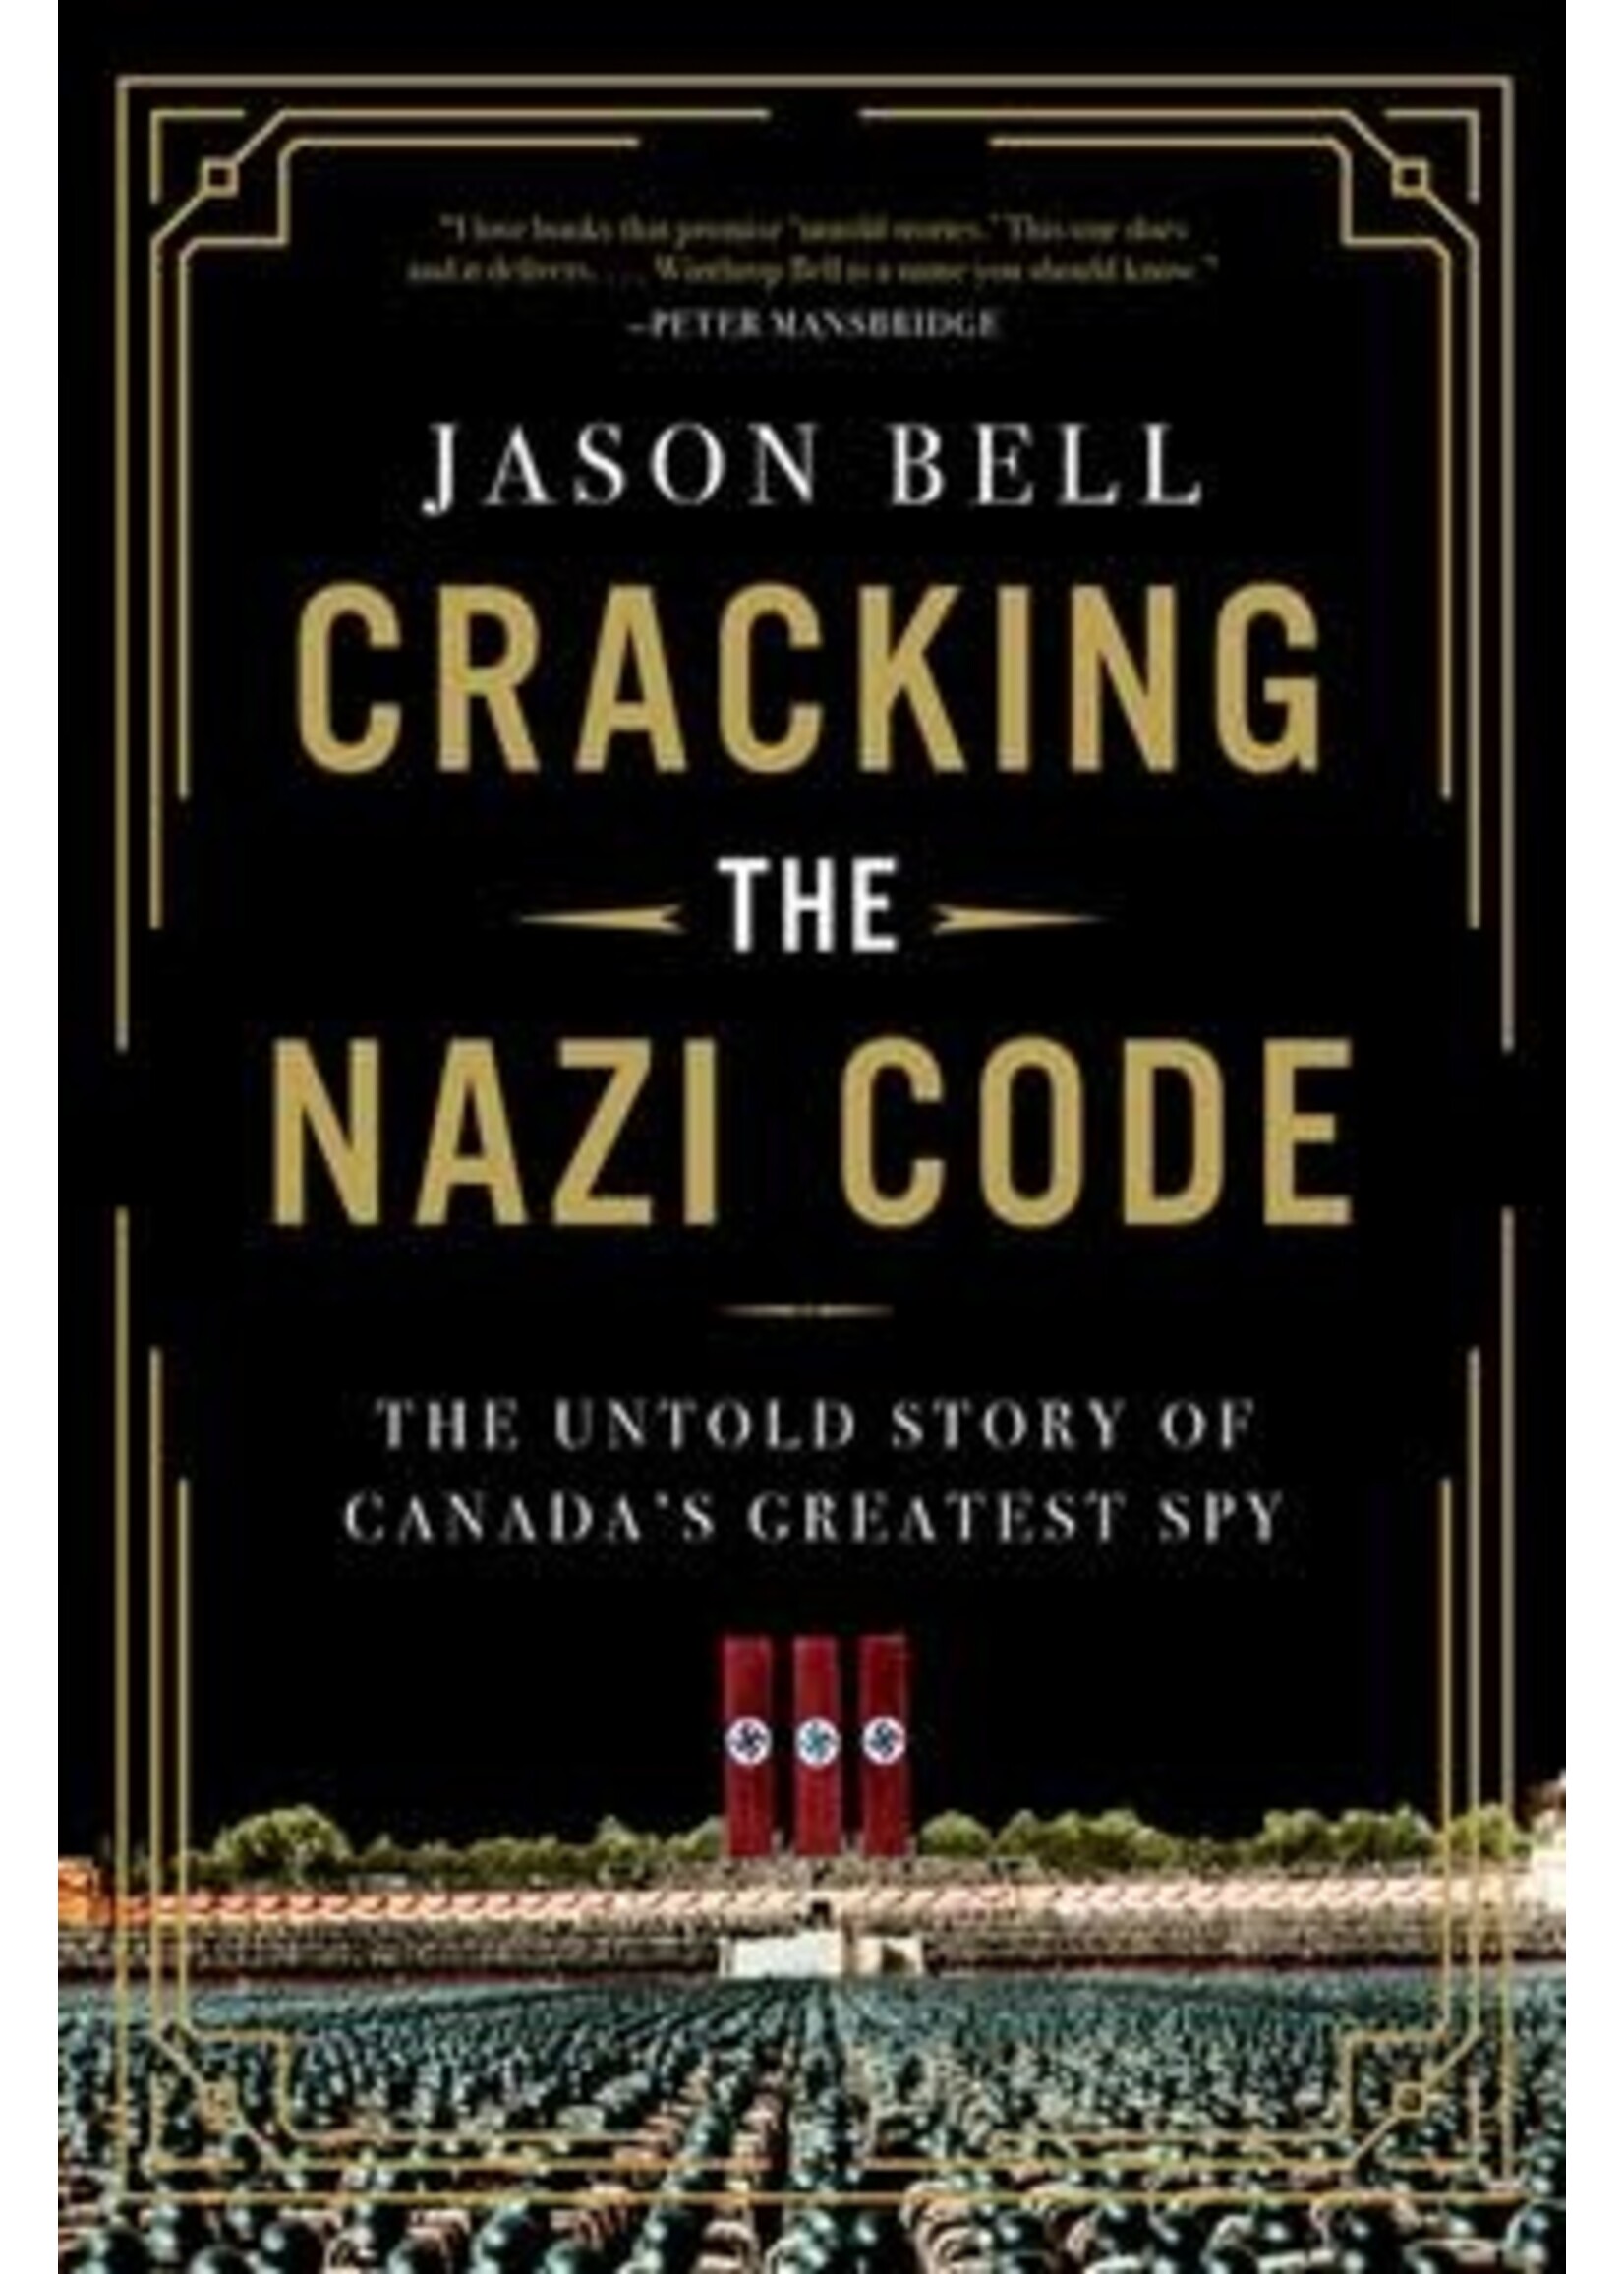 Cracking the Nazi Code: The Untold Story of Canada's Greatest Spy by Jason Bell